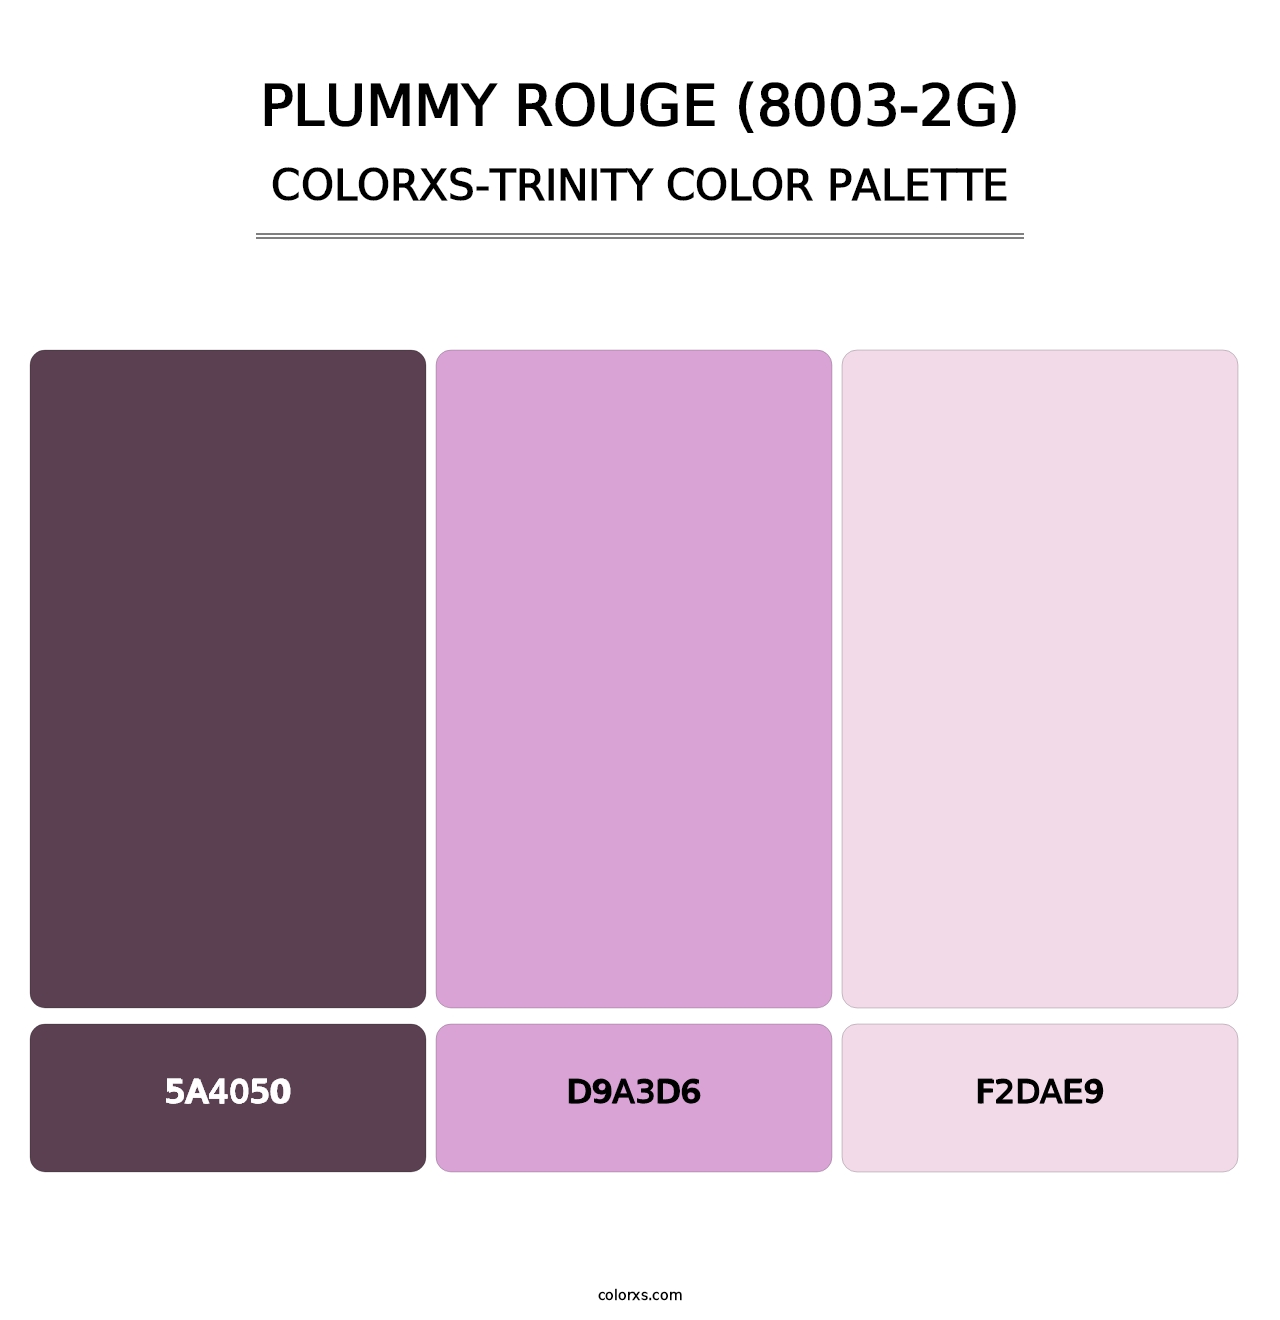 Plummy Rouge (8003-2G) - Colorxs Trinity Palette